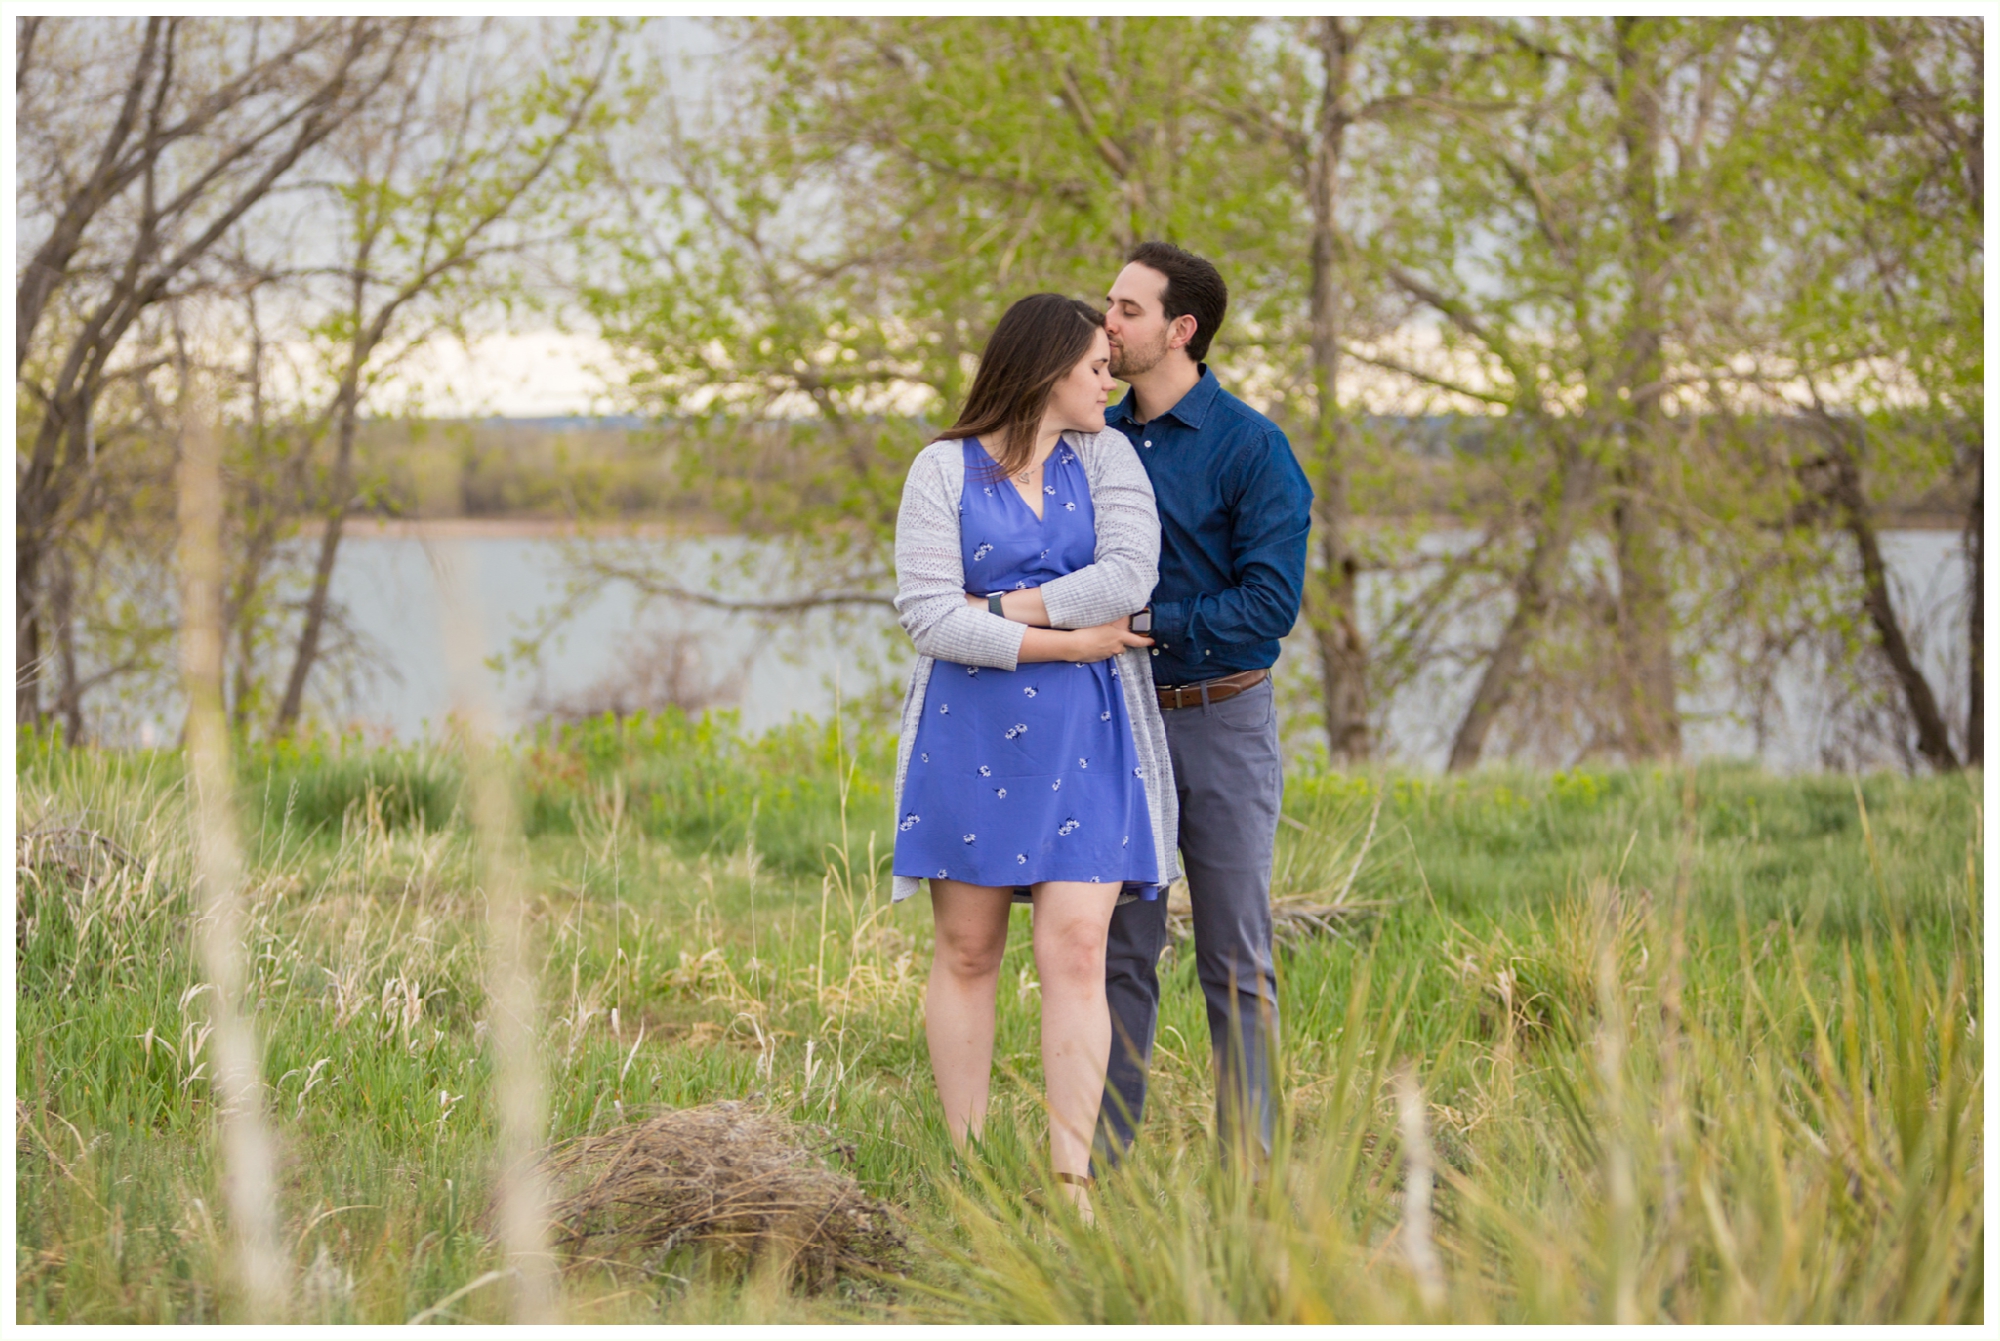 denver engagement photographer shoots spring Colorado session at Cherry Creek Reservoir. Foggy springy engagement session by Colorado engagement photographer Kathryn Kim. couple wears blue and grey engagement outfits. couple is very natural and candid, capturing authentic moments. .